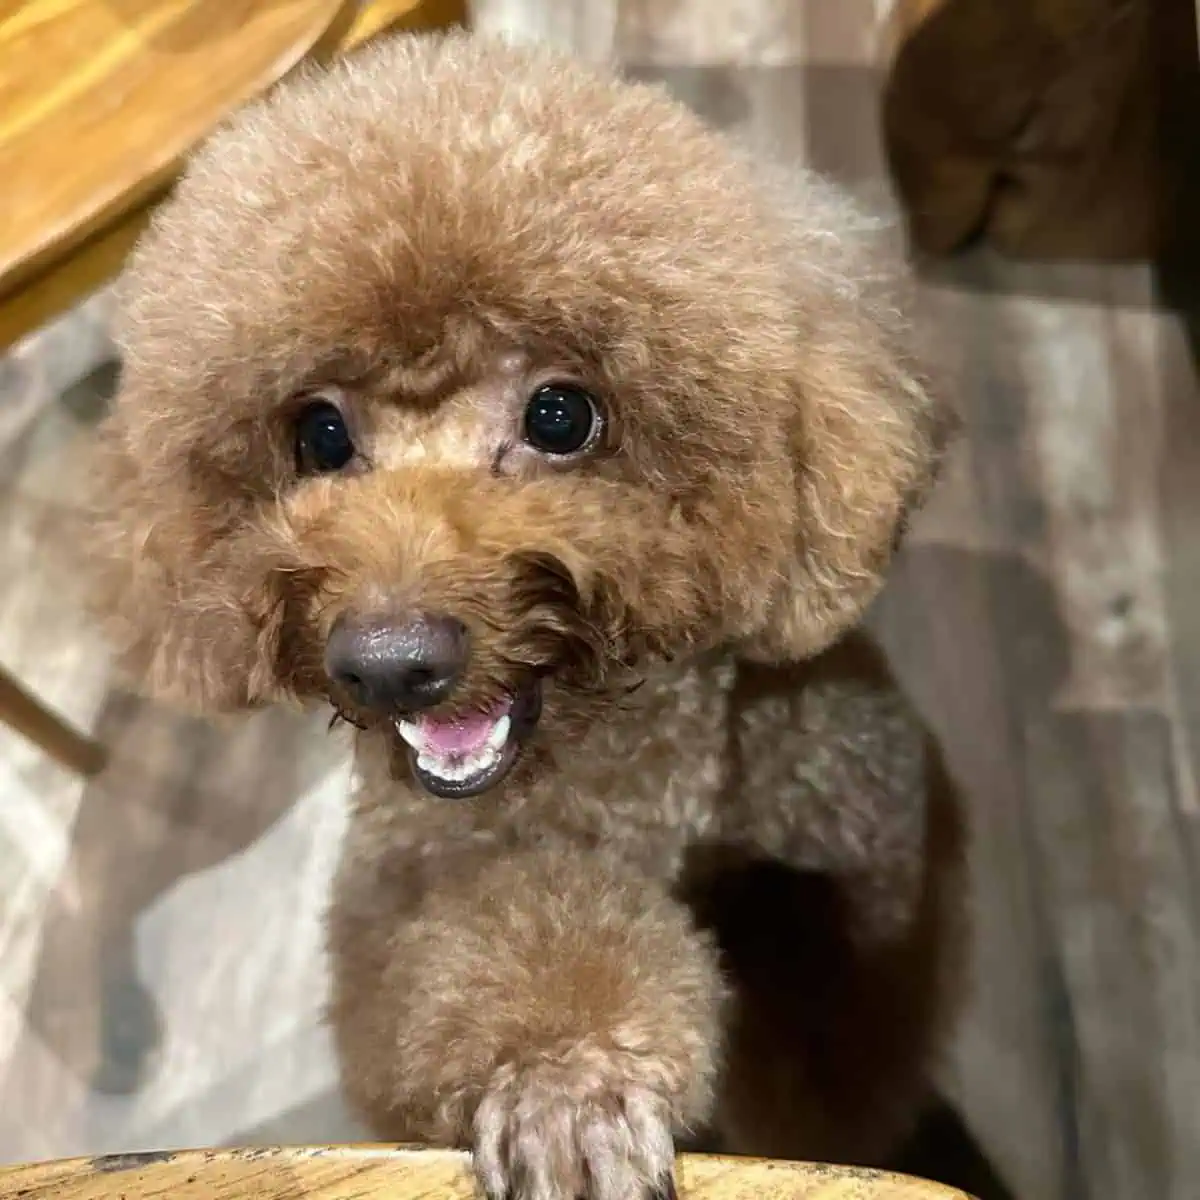 Poodle looks excited and happy